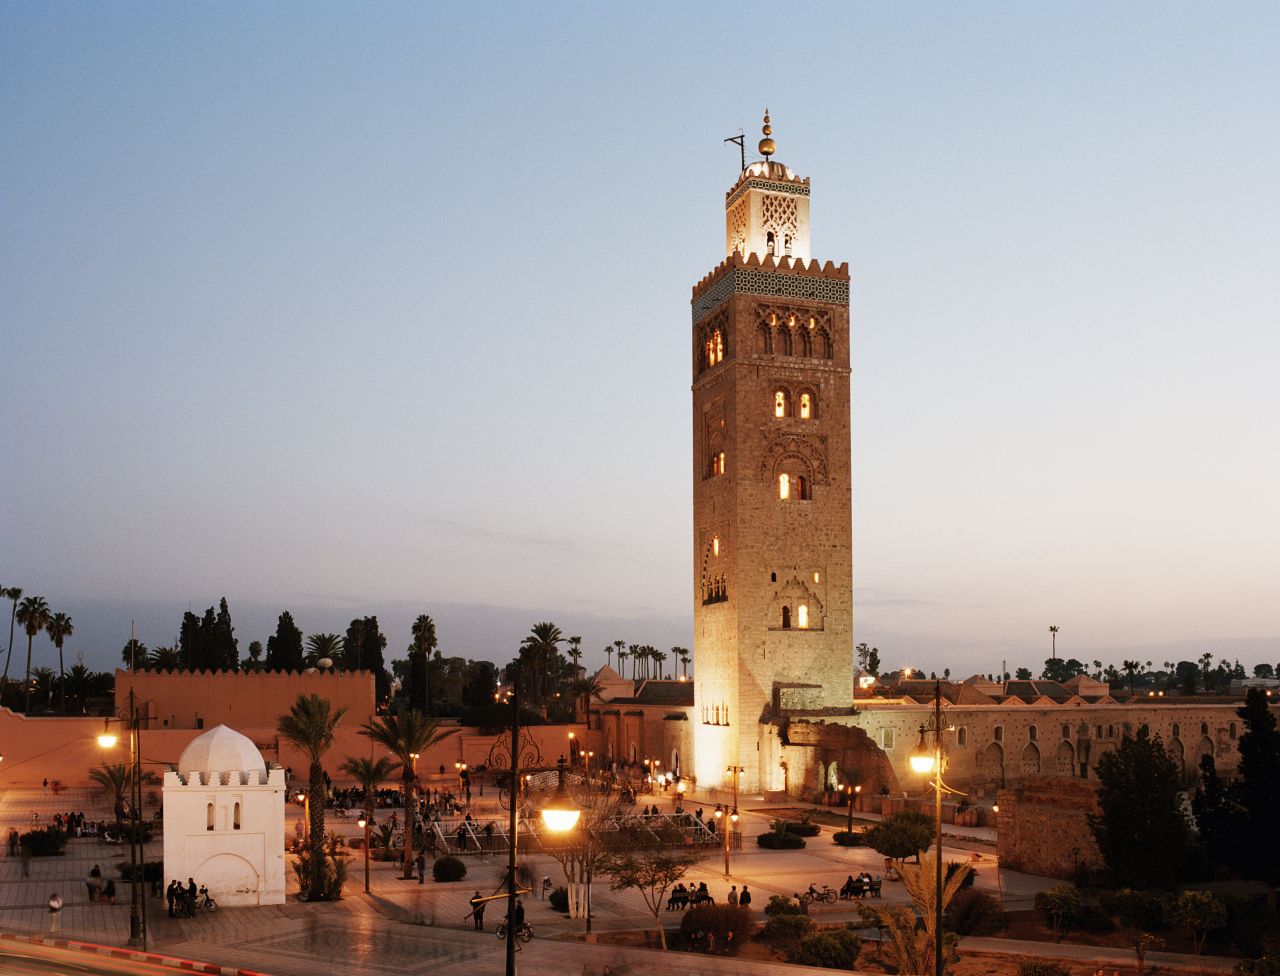  Koutoubia Minaret and mosque at dusk in Marrakesh, Morocco.